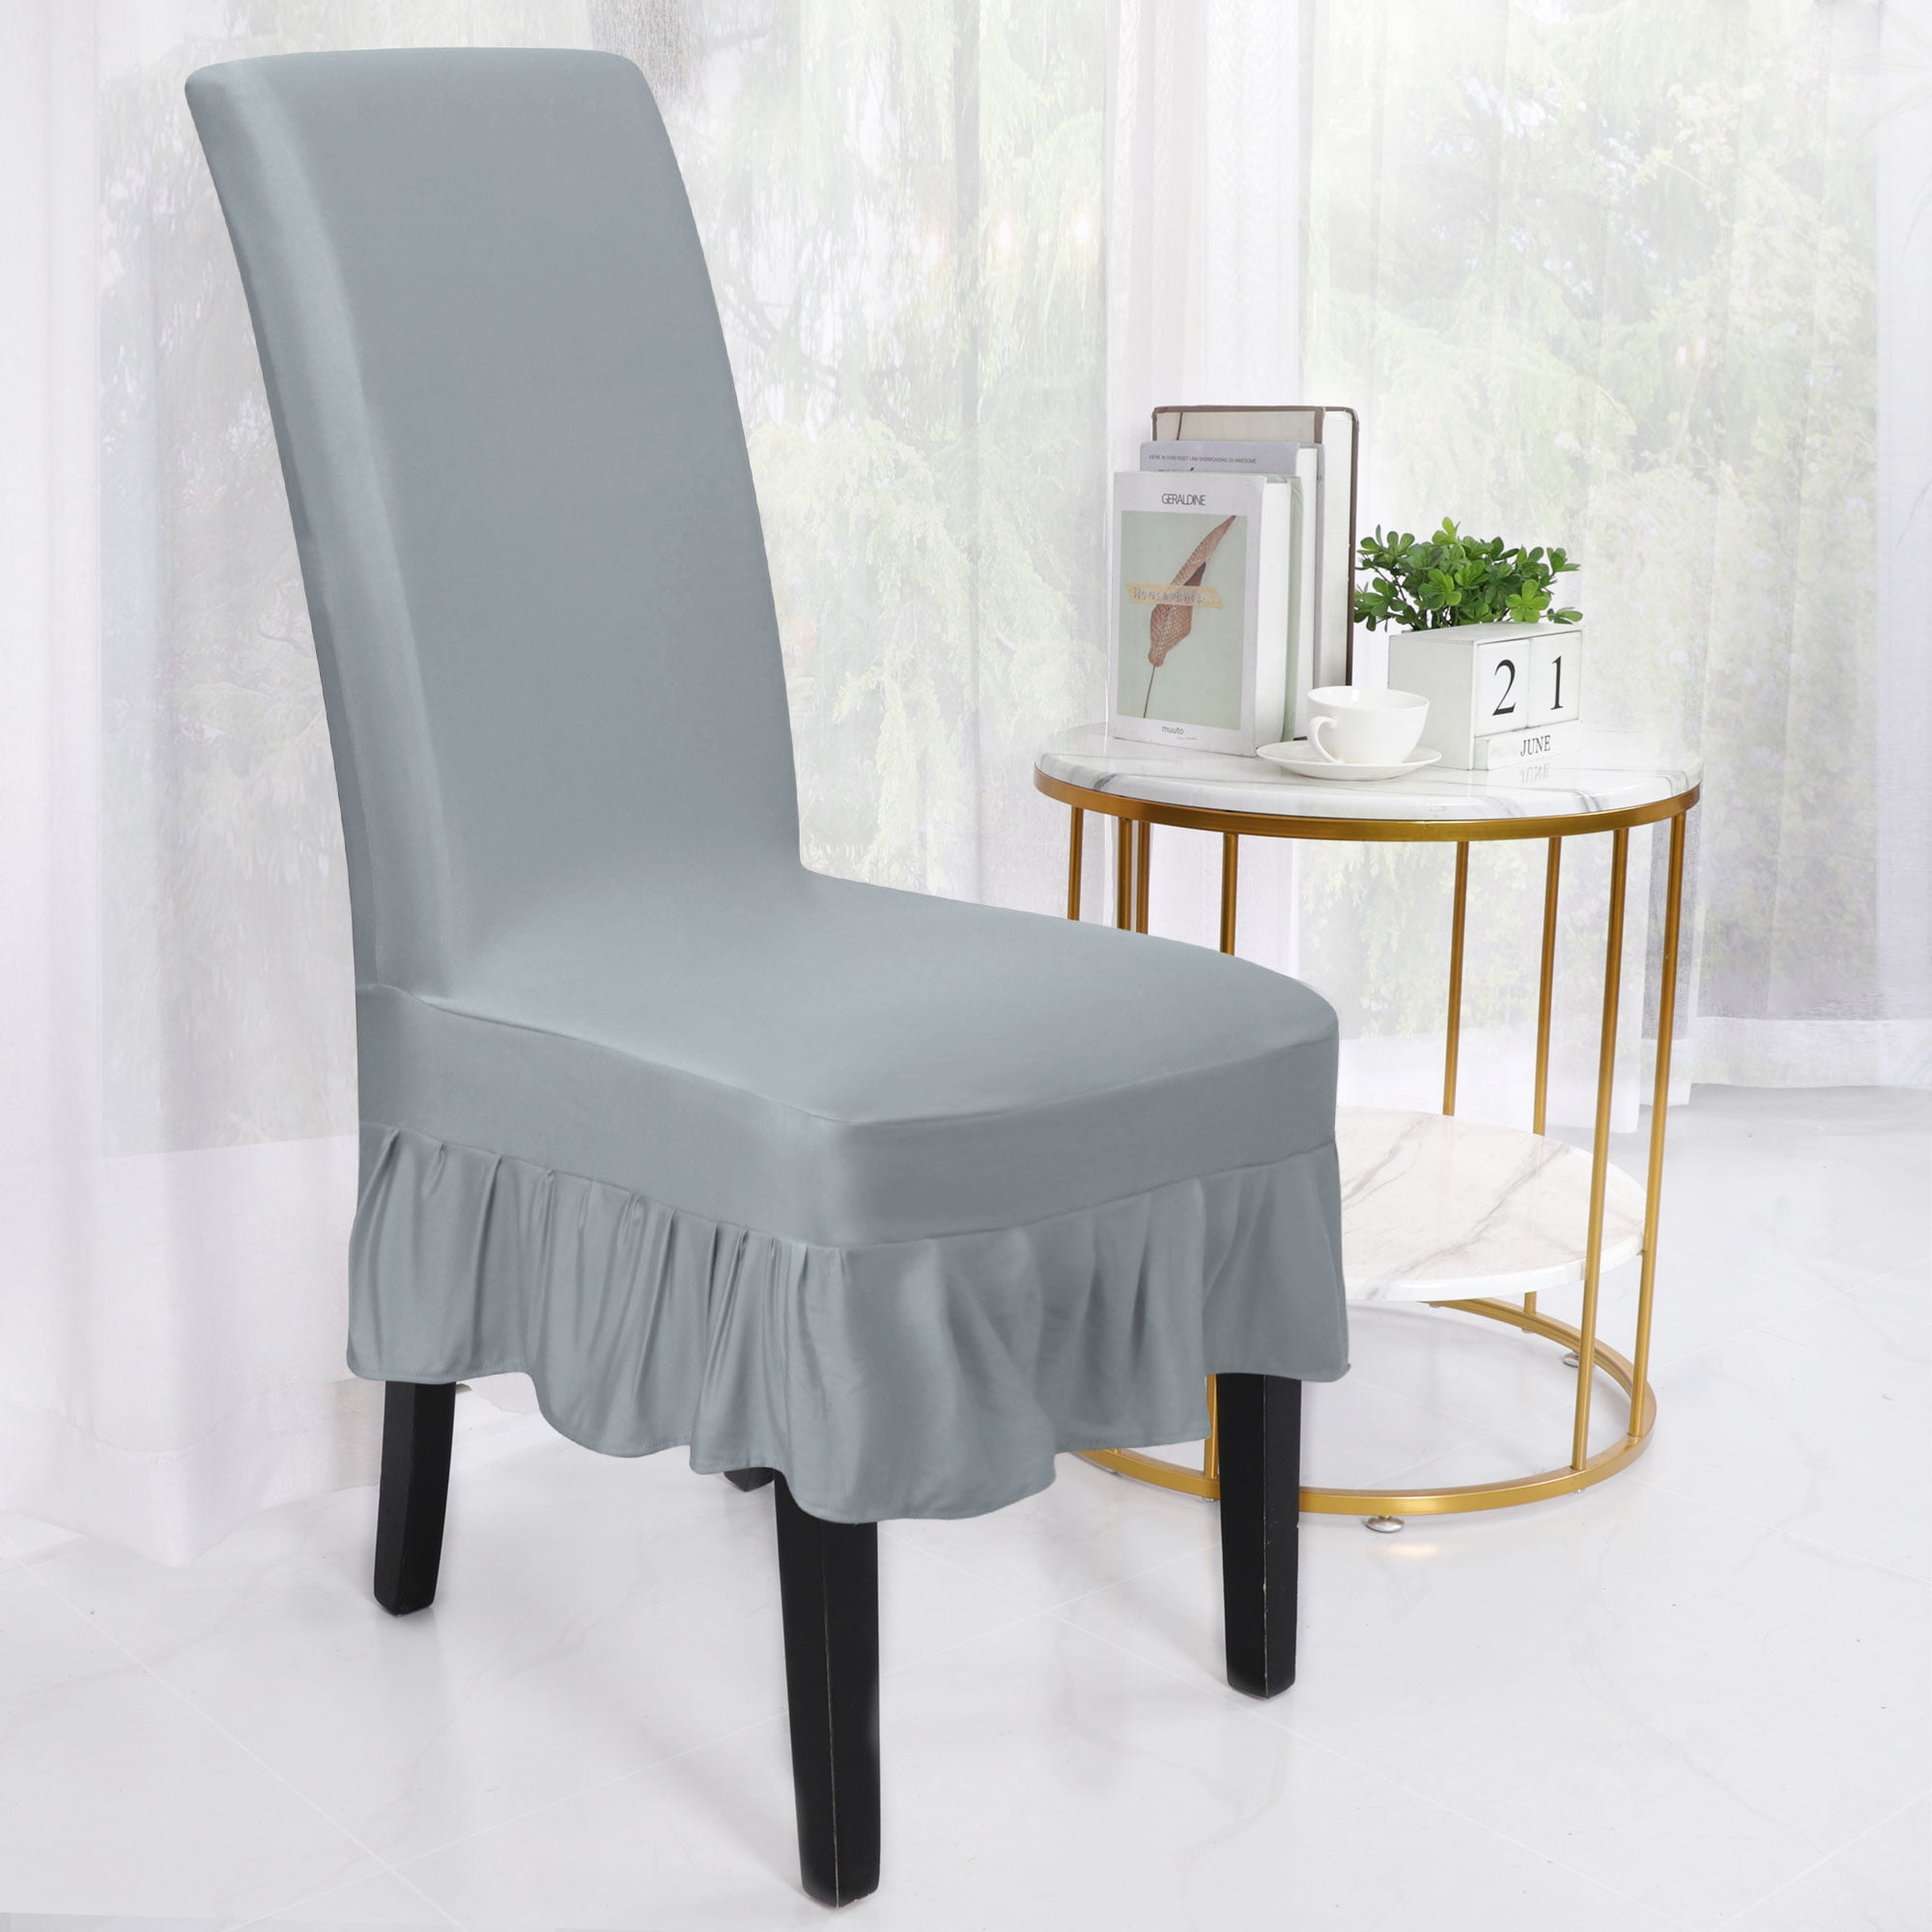 Khaki, Set of 4 Details about   Velvet Dining Room Chair Covers Stretch Dining Chair Slipcovers 